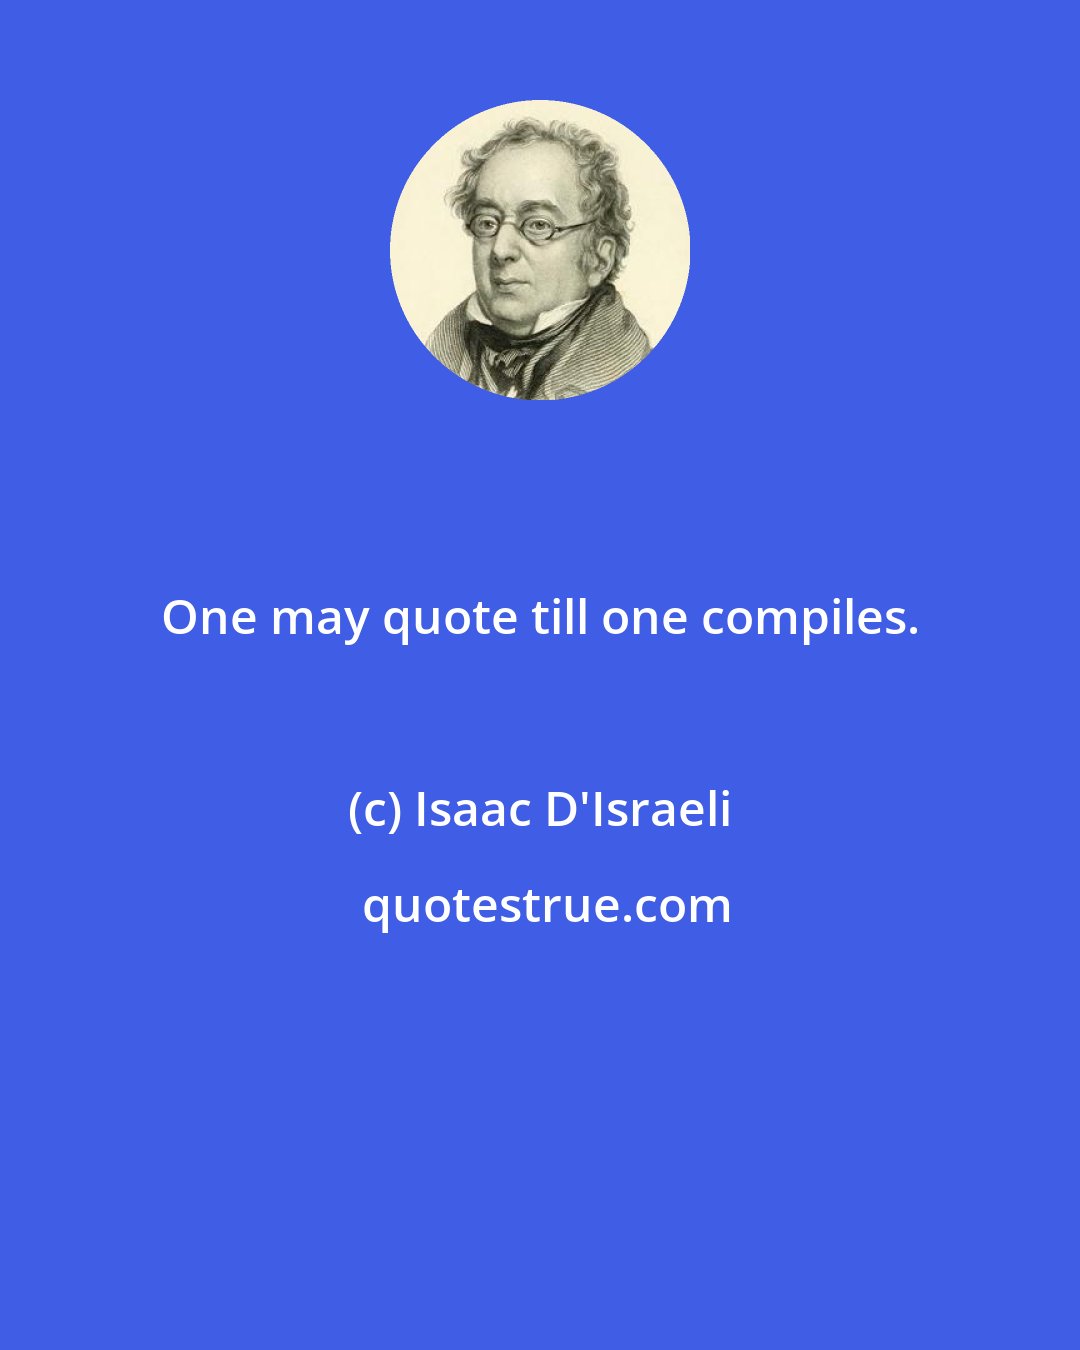 Isaac D'Israeli: One may quote till one compiles.